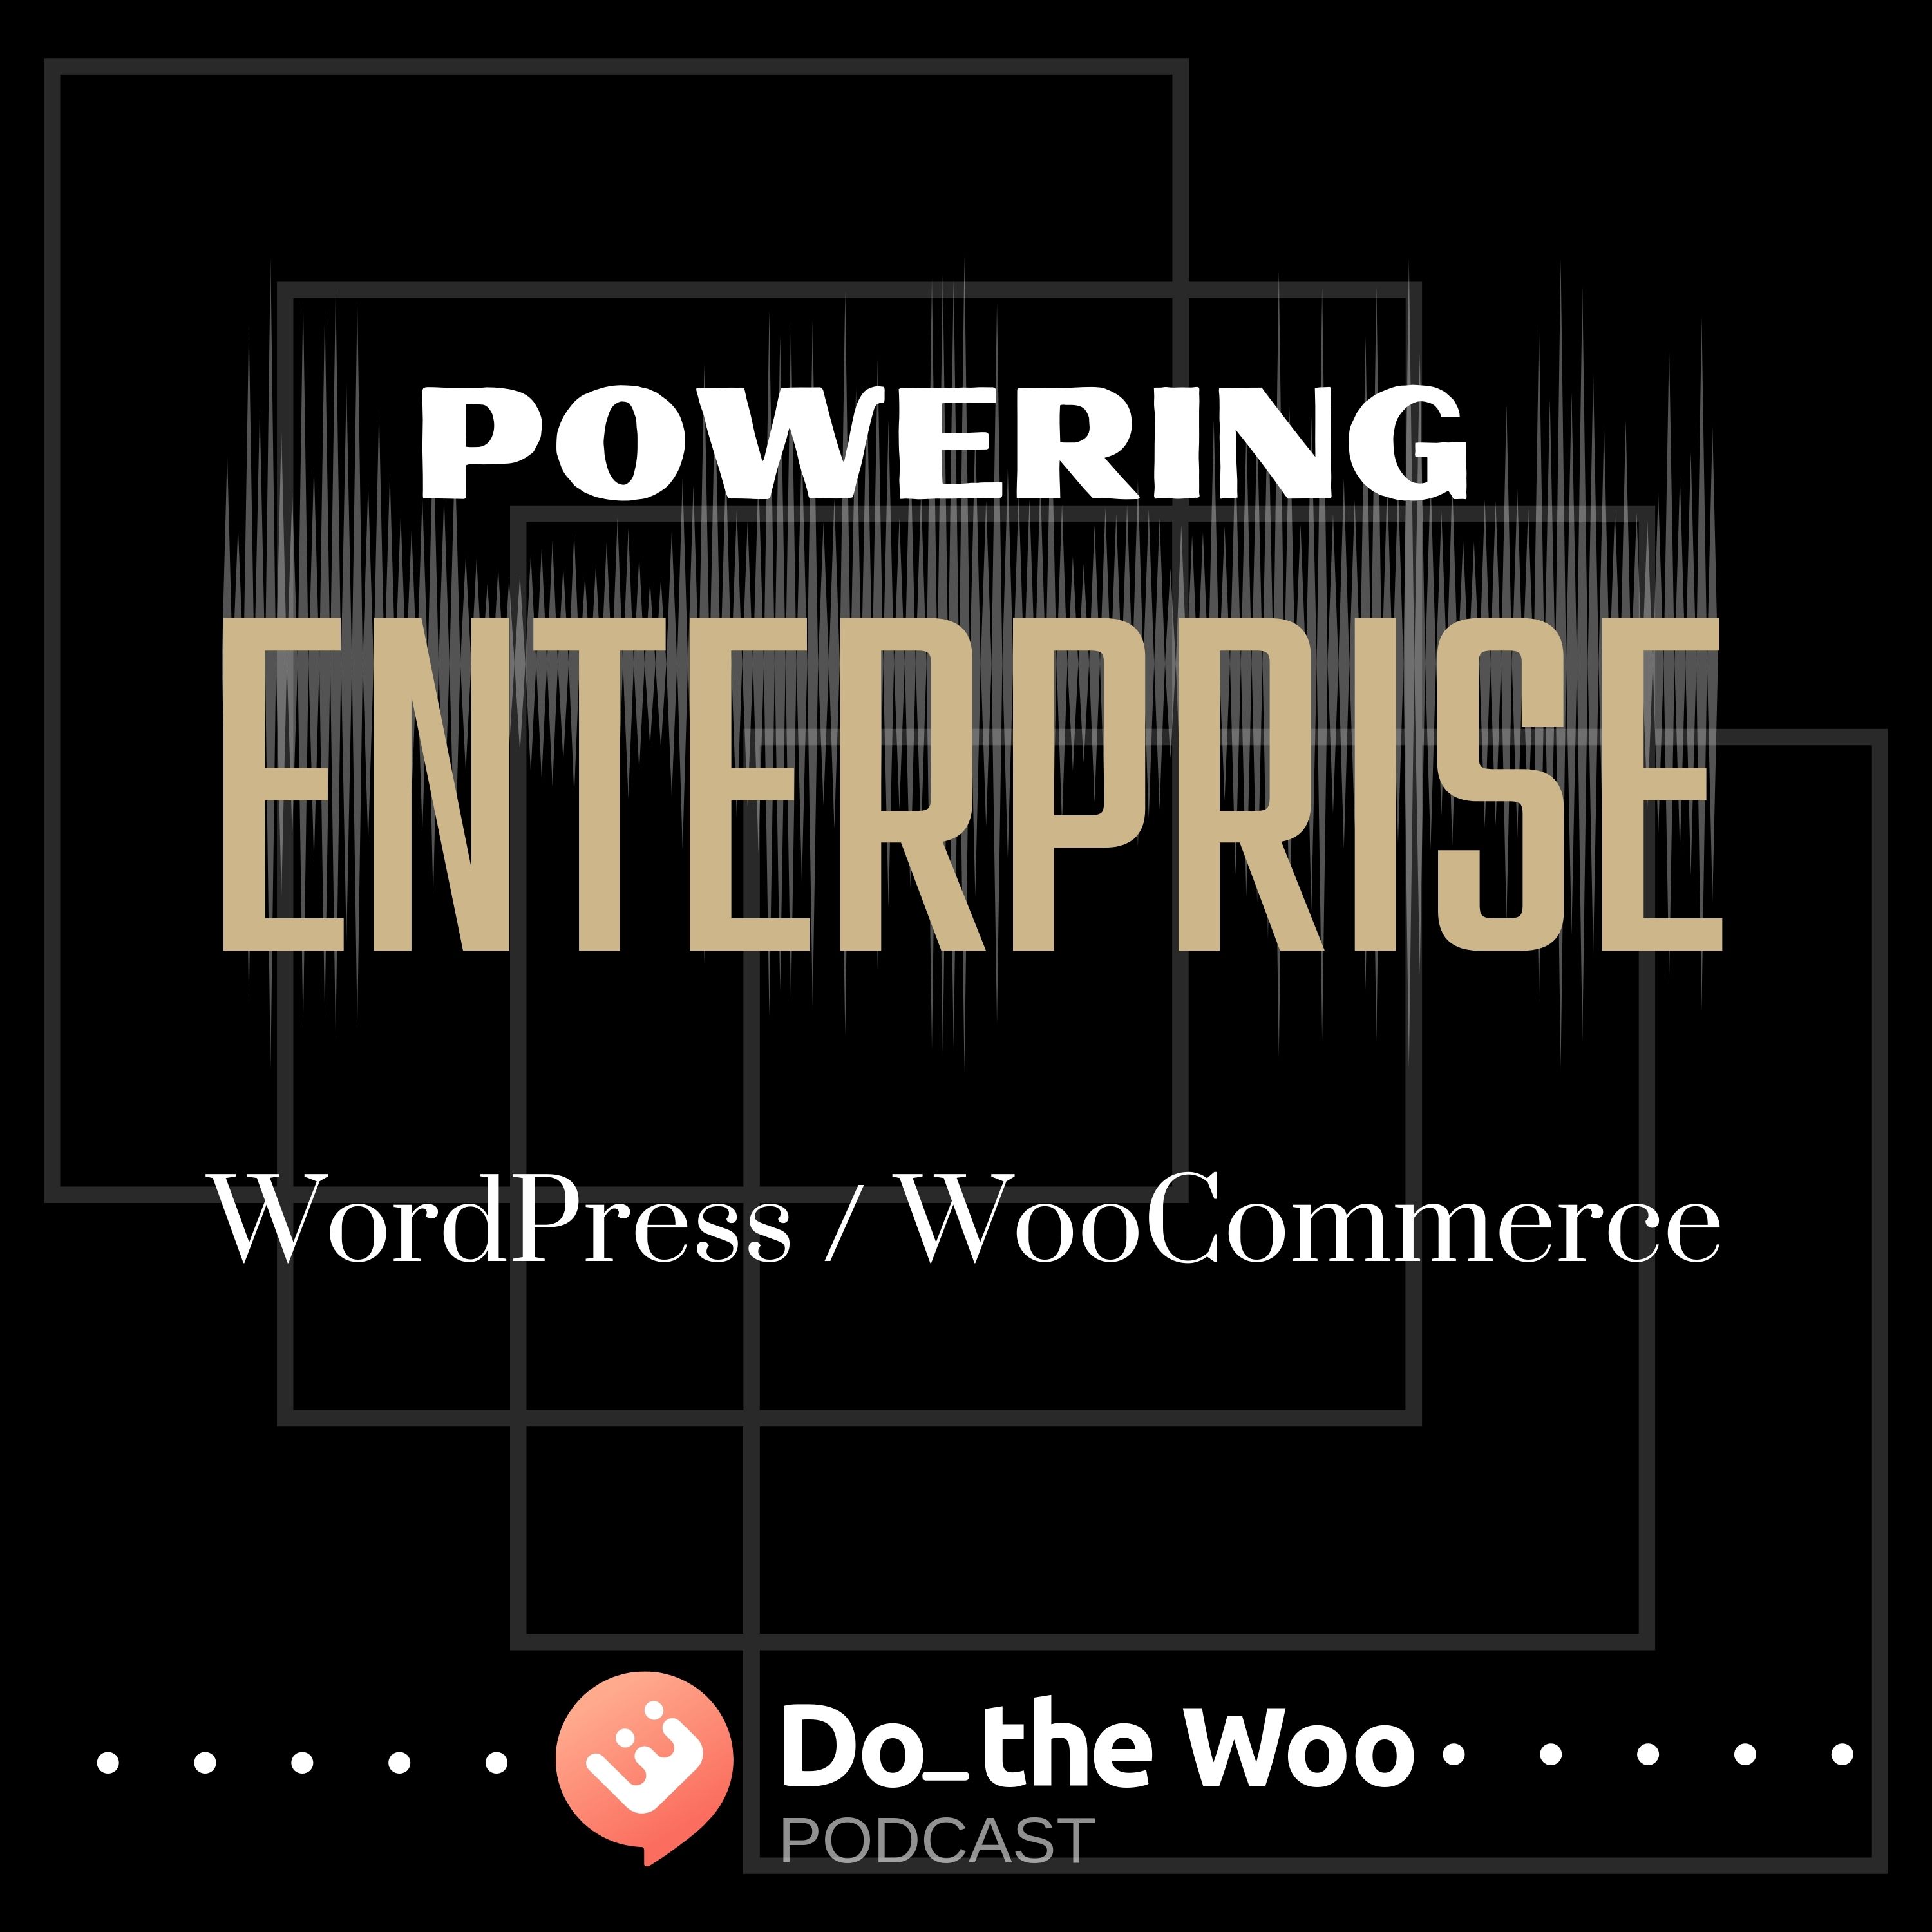 Powering Enterprise with WooCommerce and WordPress